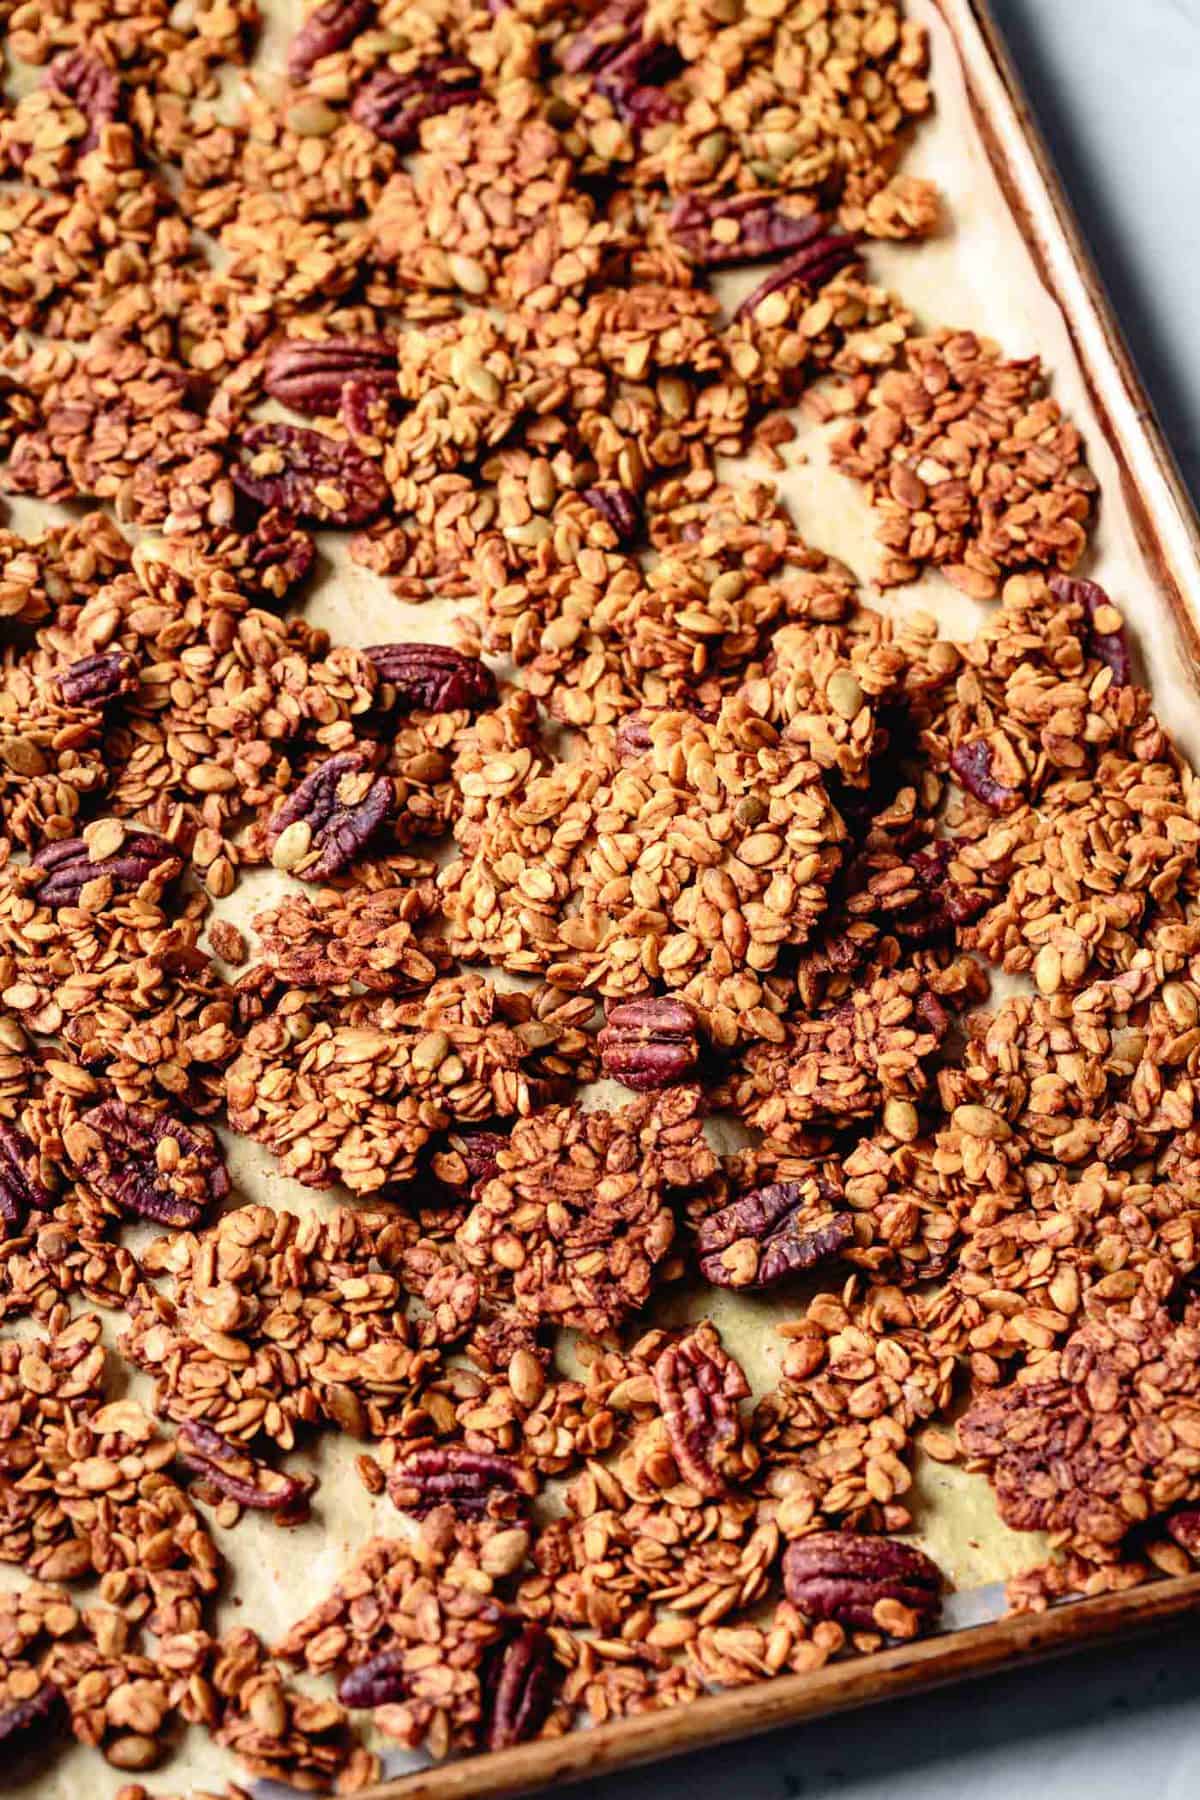 big clumps and clusters of golden pumpkin spice granola on a baking sheet